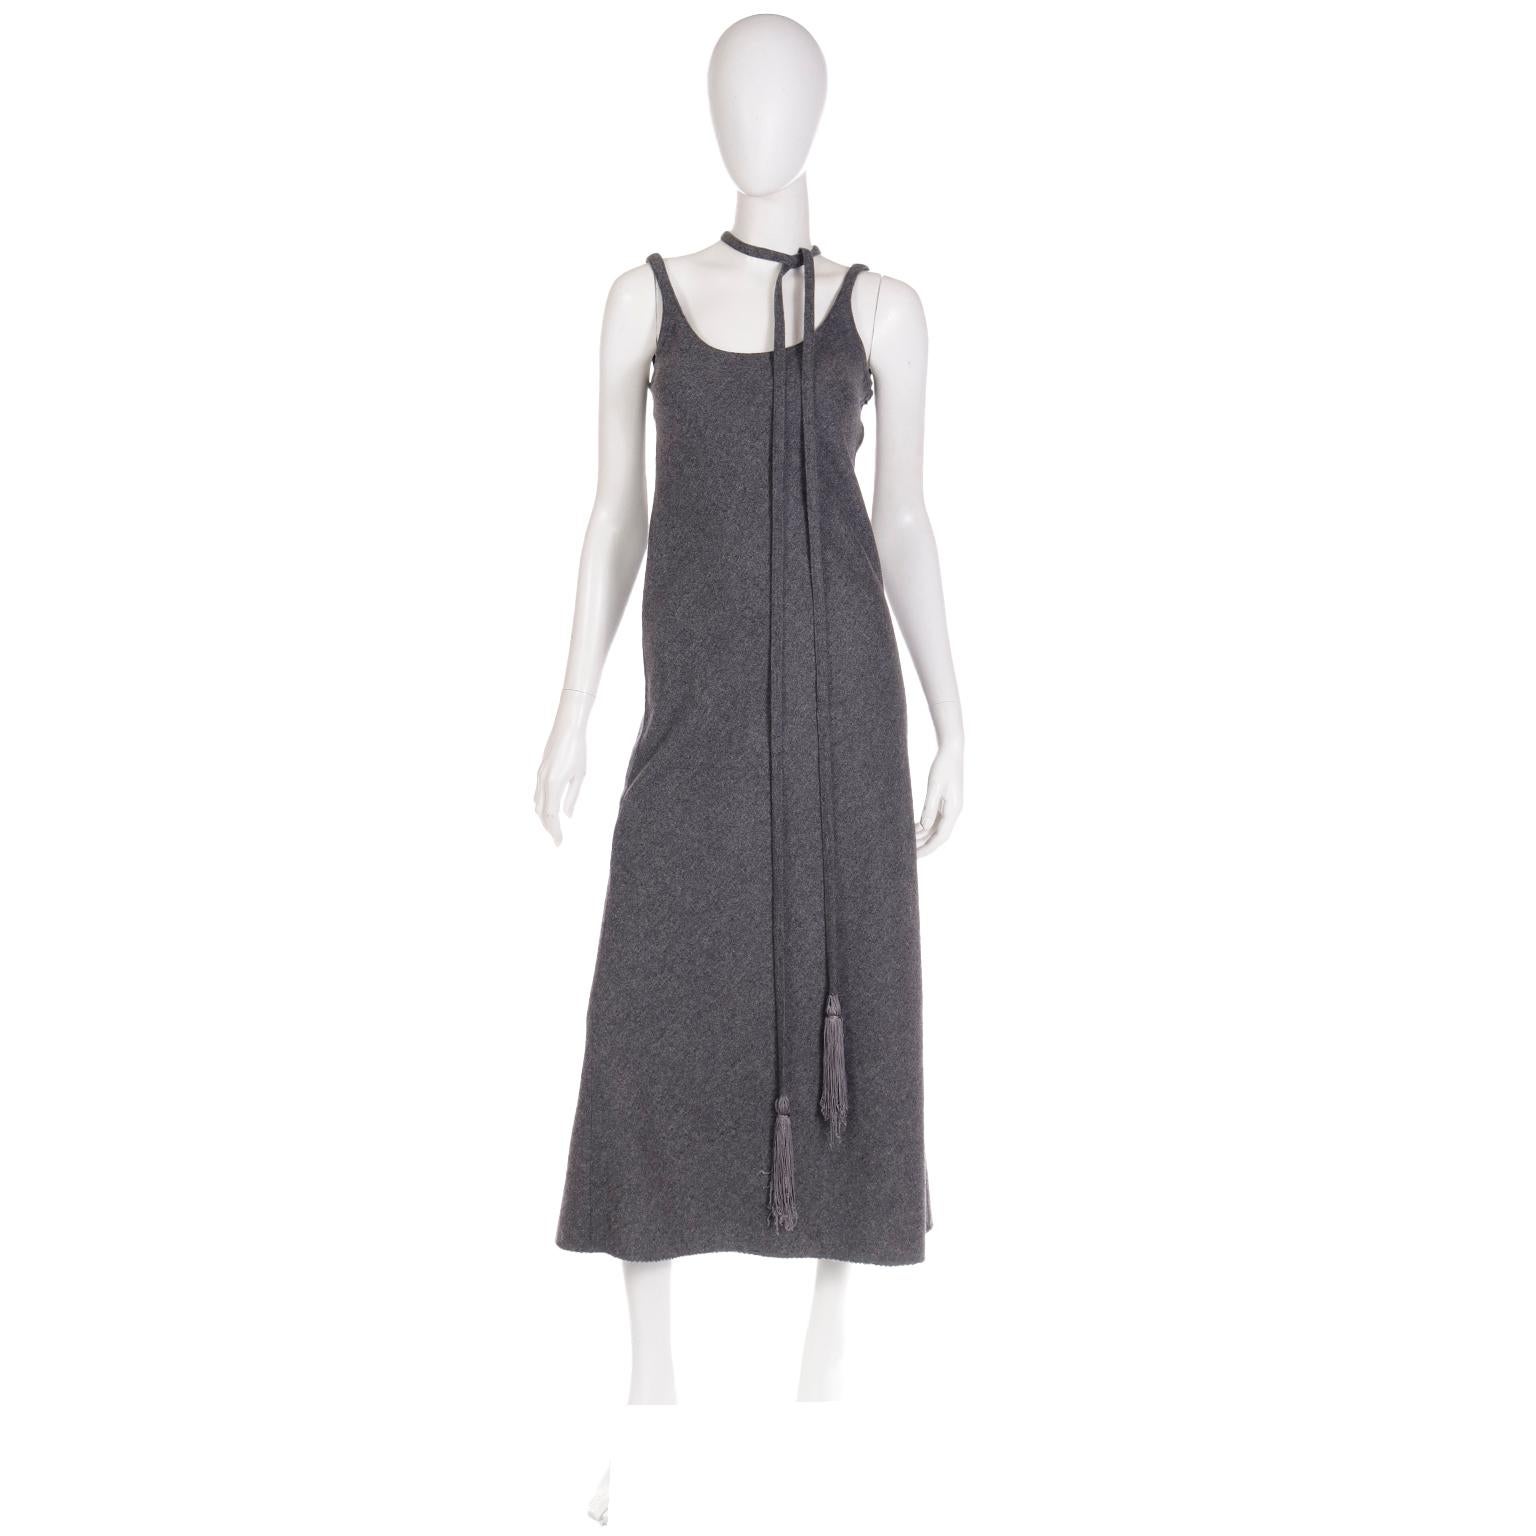 Geoffrey Beene Vintage Gray Wool Dress With Tassel Belt In Excellent Condition For Sale In Portland, OR